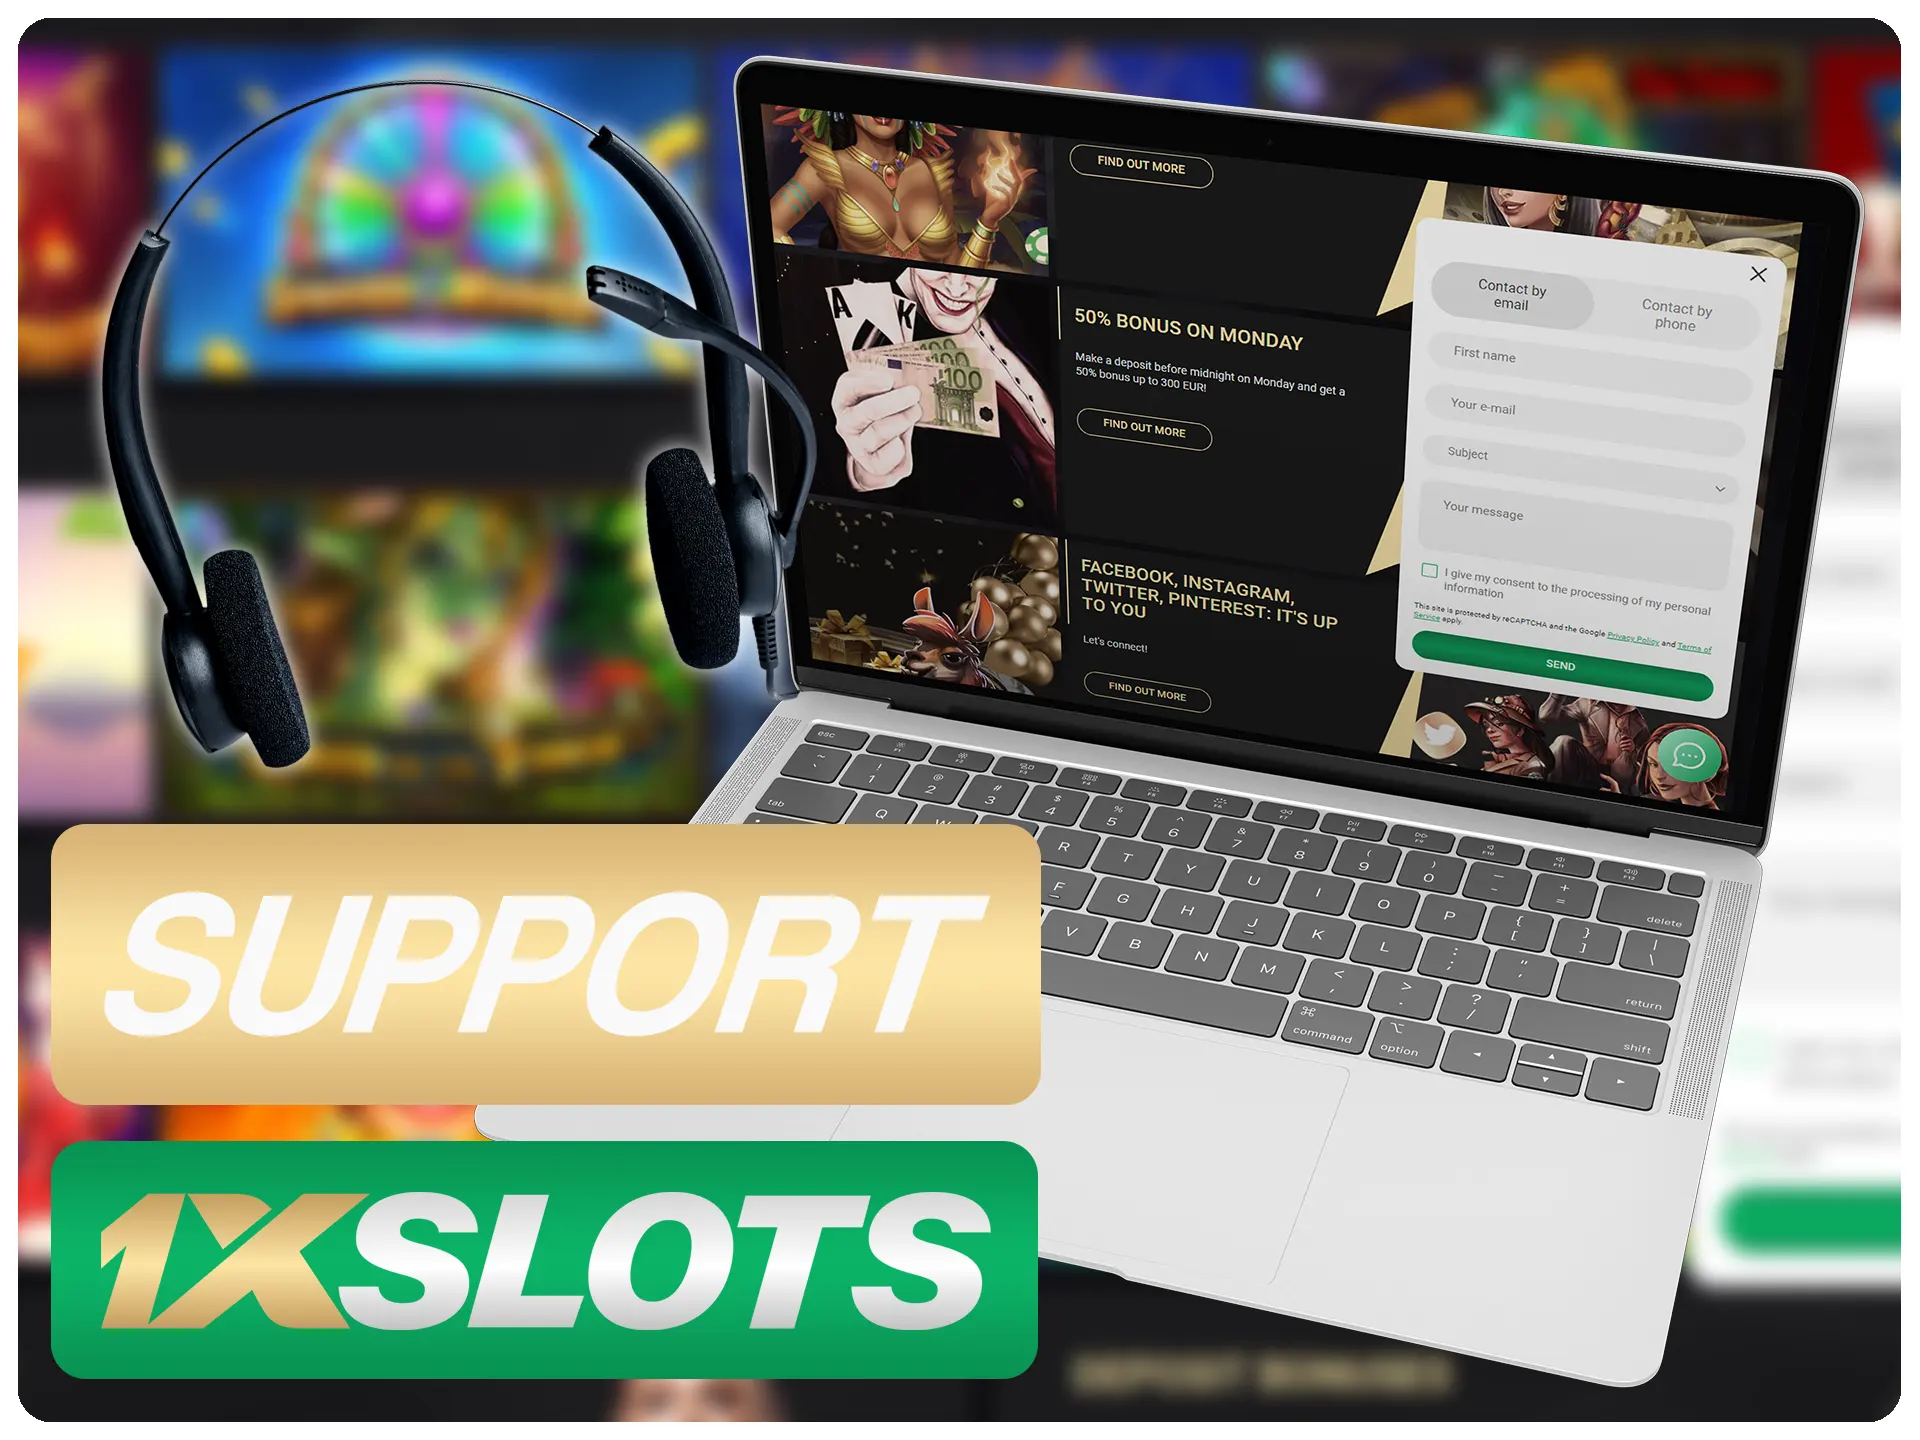 1xSlots has its own online support for customers.